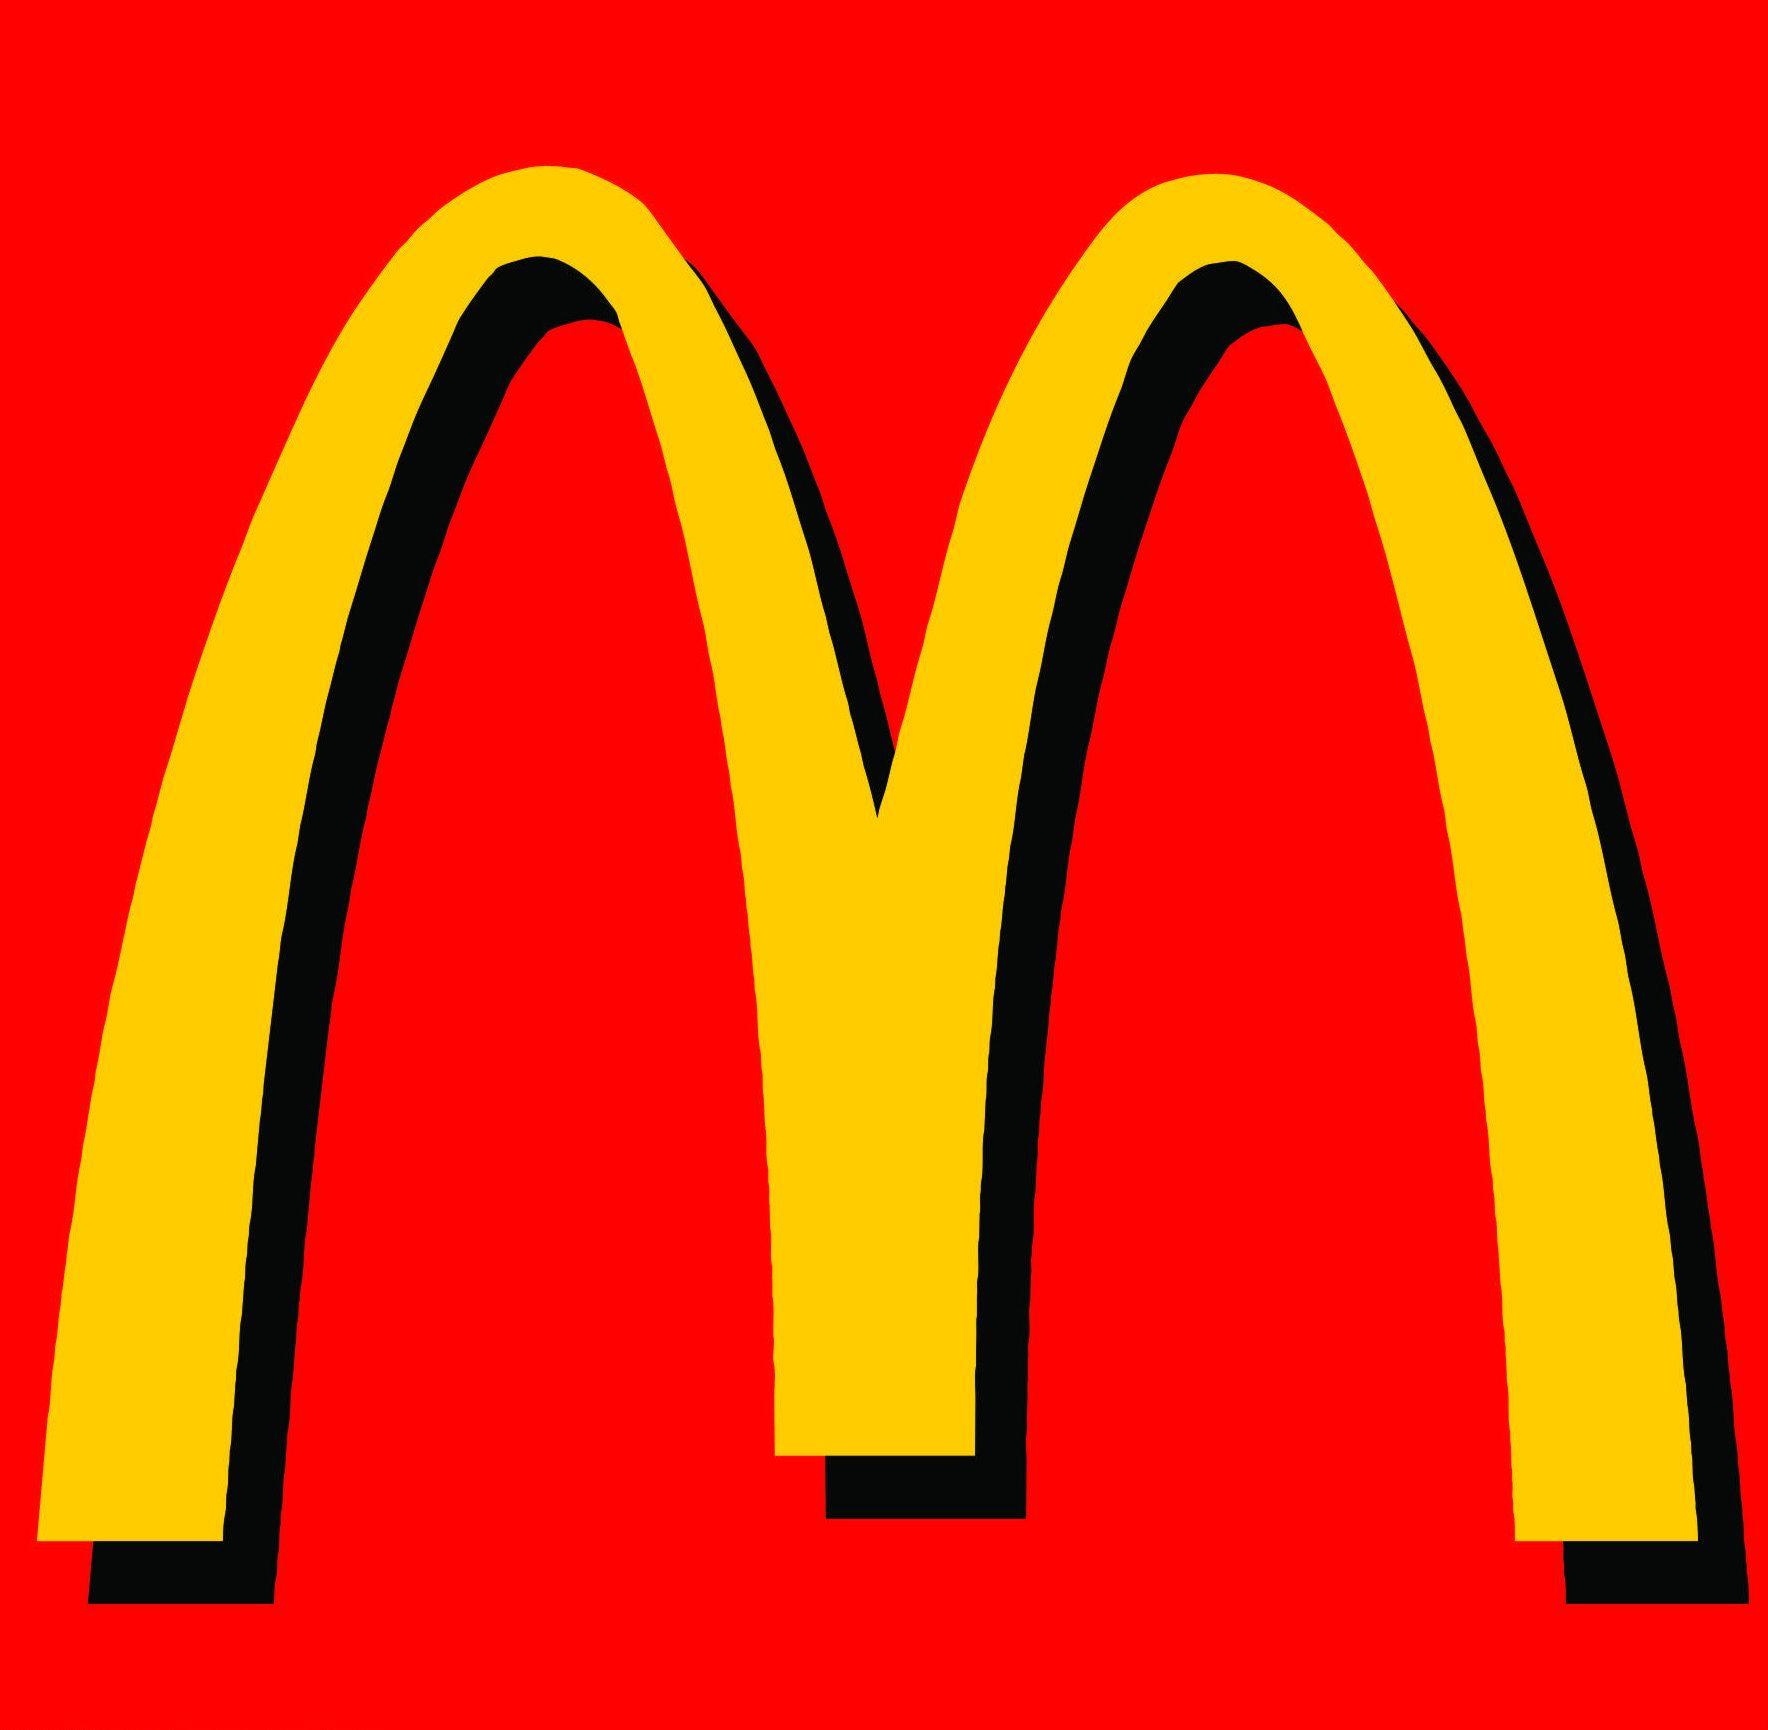 MCD Logo - Published on April 2015 in Advertise. Logos in 2019